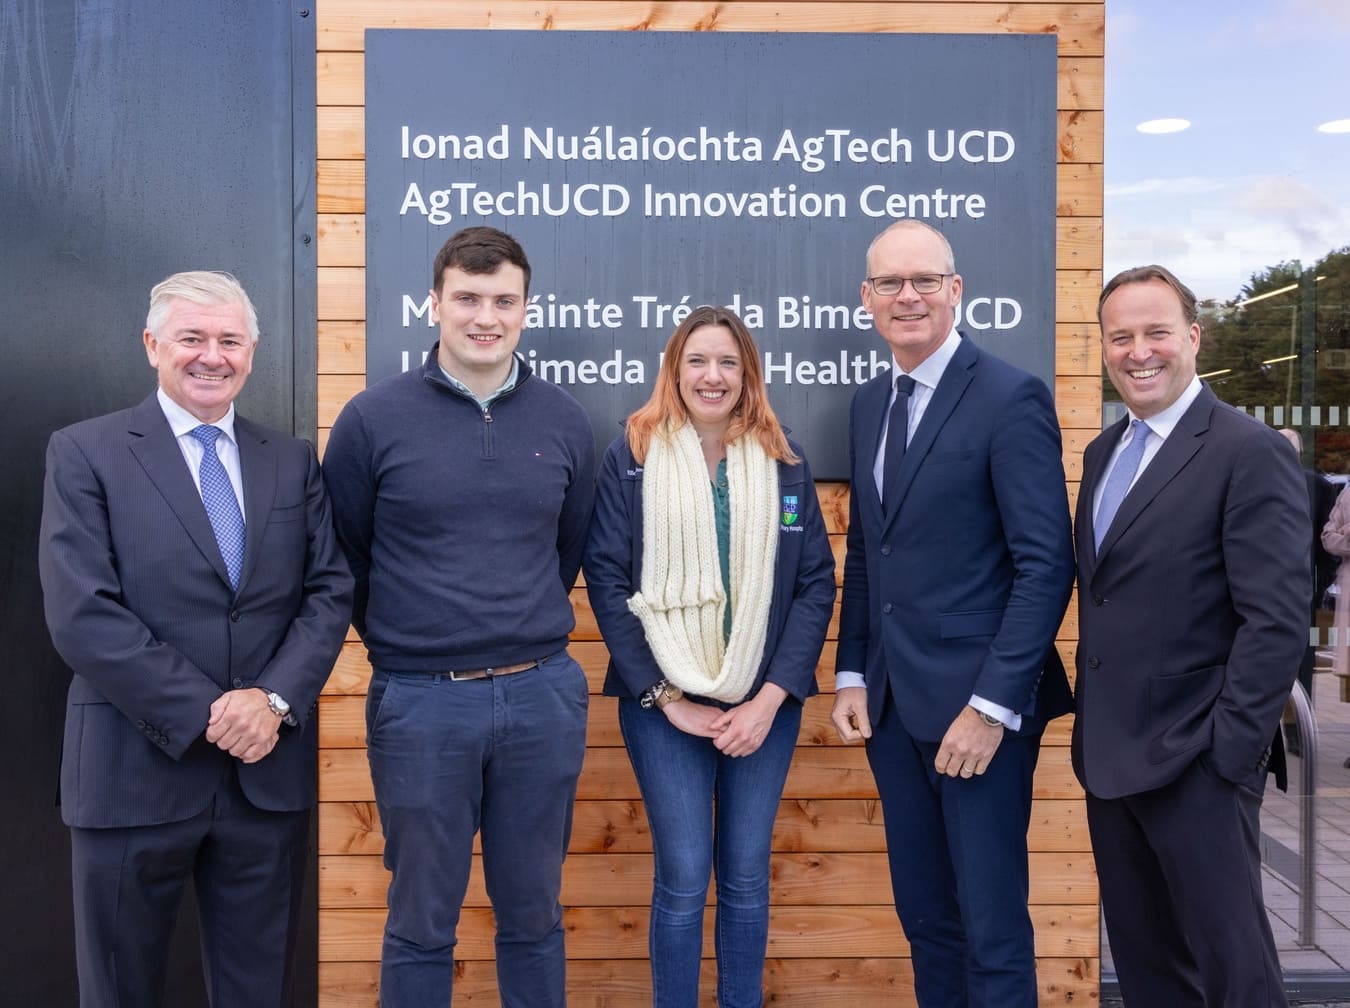 Pictured (l-r): Donal Tierney, Chairman Bimeda Group, UCD Students, Minister Simon Coveney TD and Gavin Tierney, Bimeda CEO